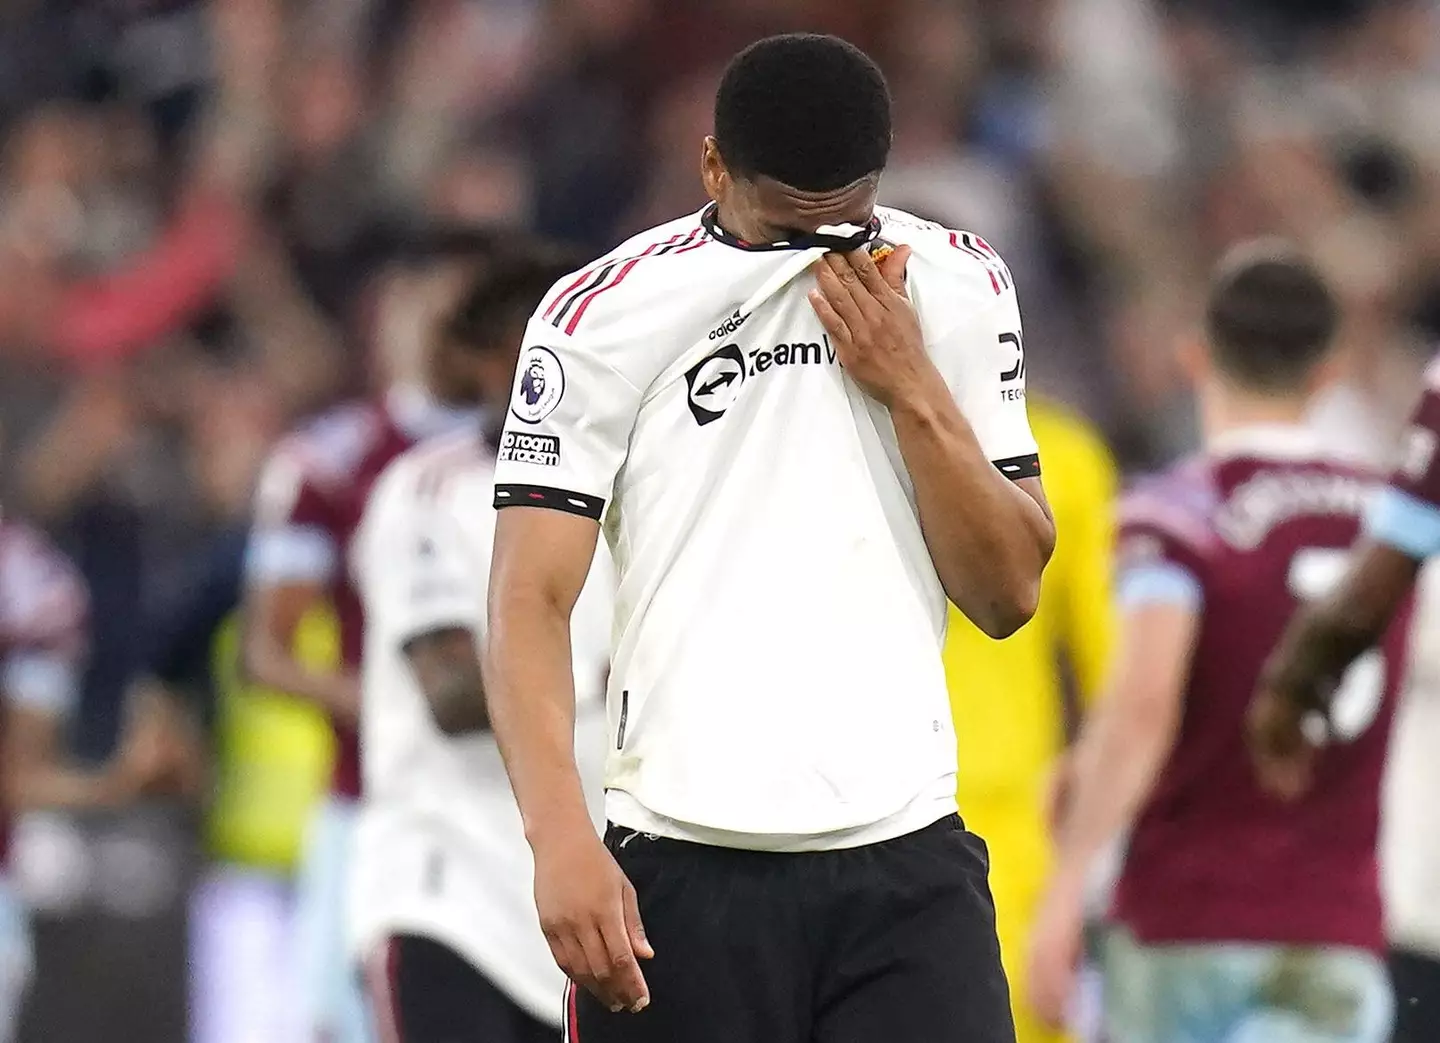 It's not been a great season for Martial. Image: Alamy